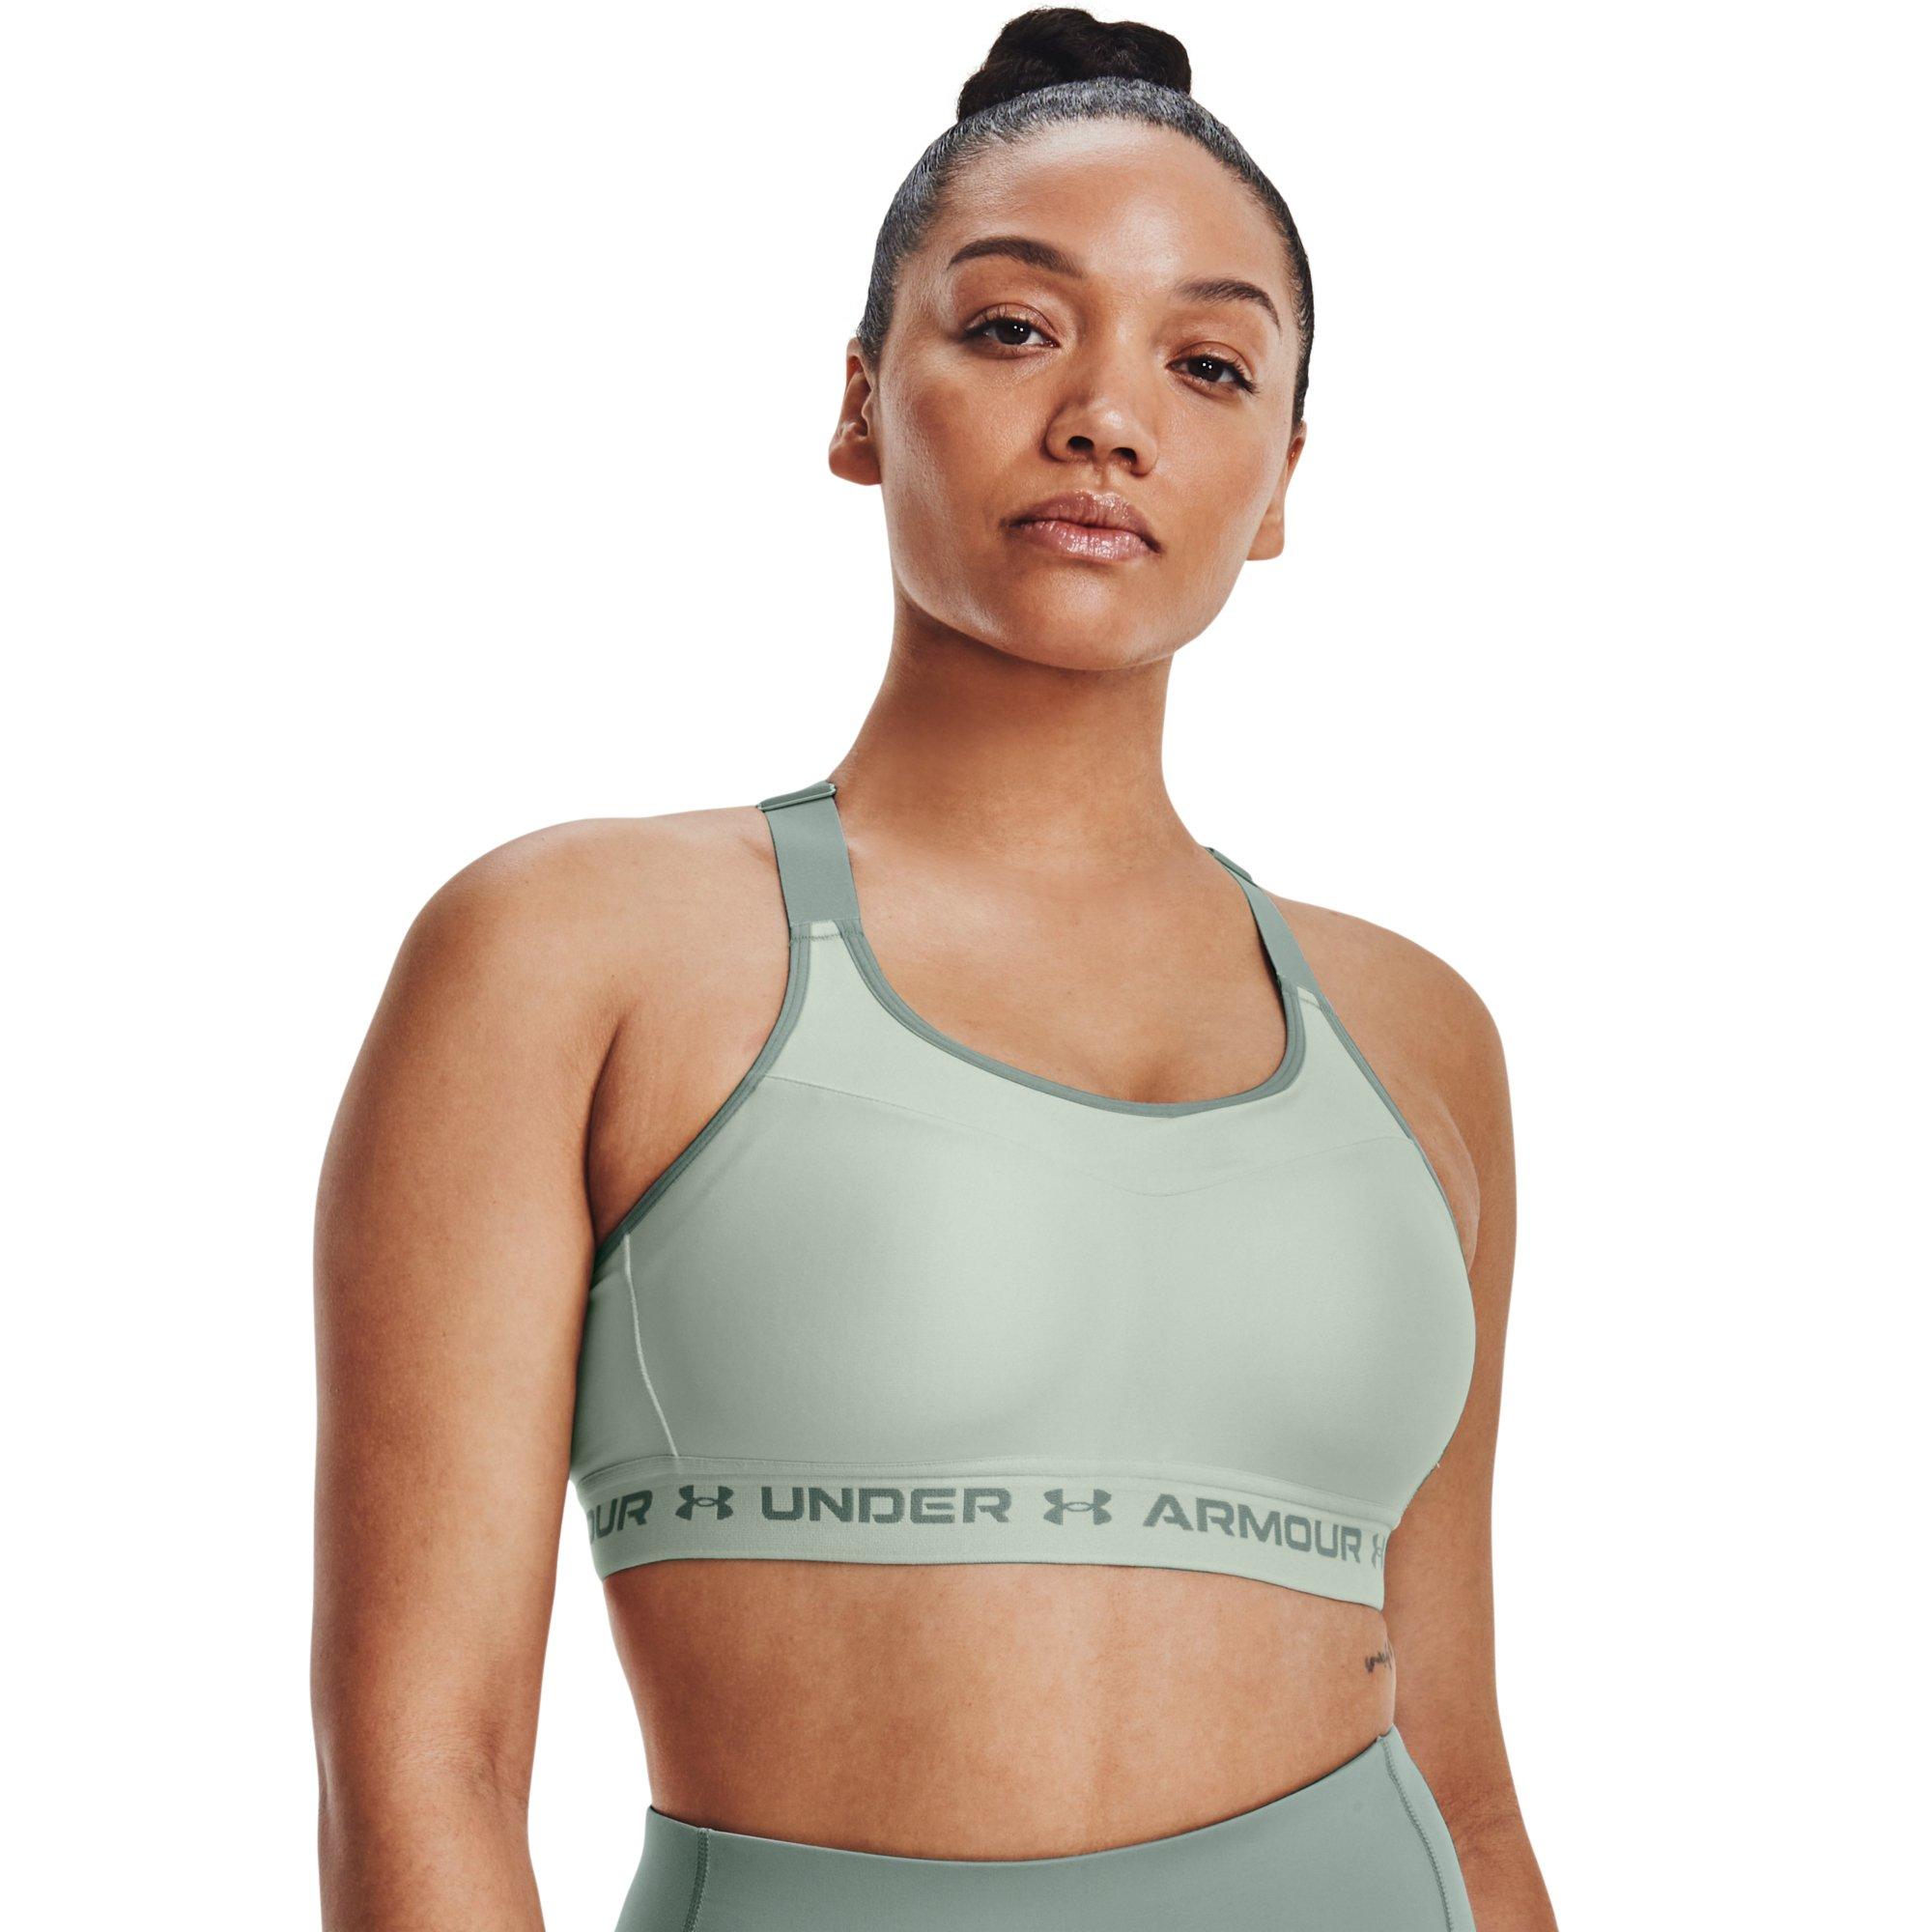 NWT UNDER ARMOUR HI-IMPACT SUPPORT COMPRESSION WHITE BRA WOMEN SIZE 32C